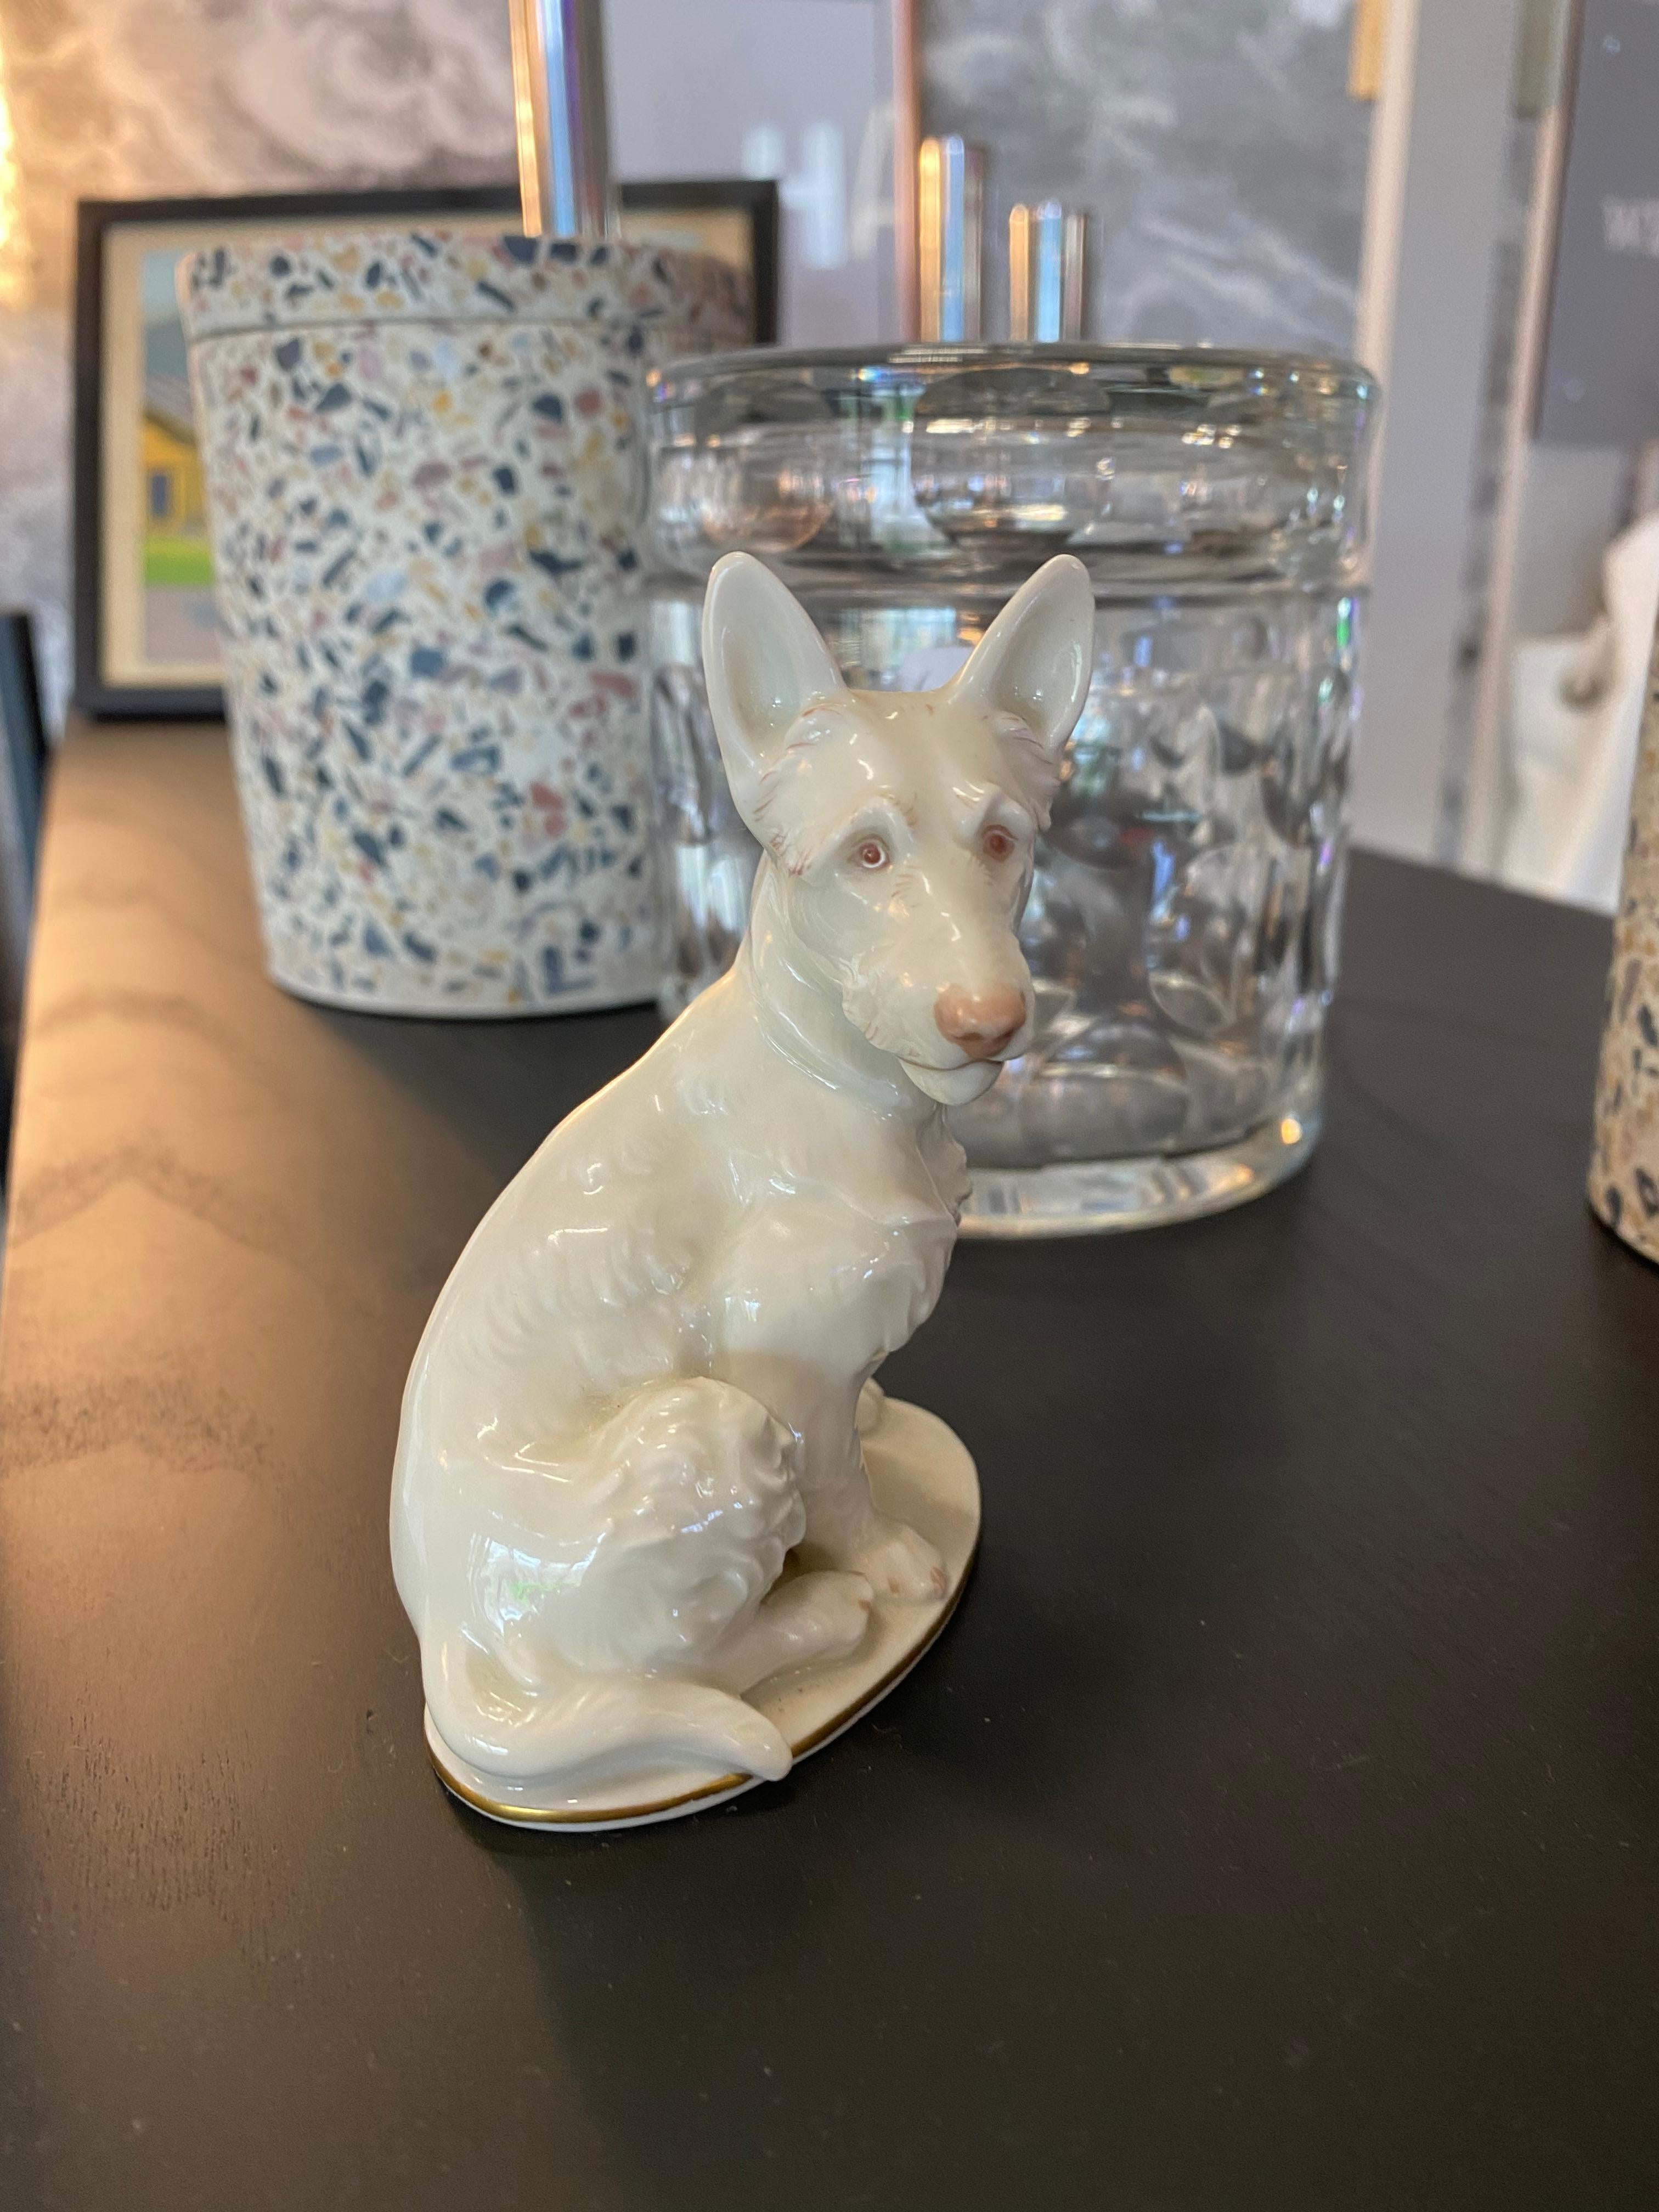 Small white Scotch Terrier made of porcelain by Rosenthal. A fine and naturalistic representation of a sitting Scotch Terrier. The porcelain is glazed white and painted in pastel tones.